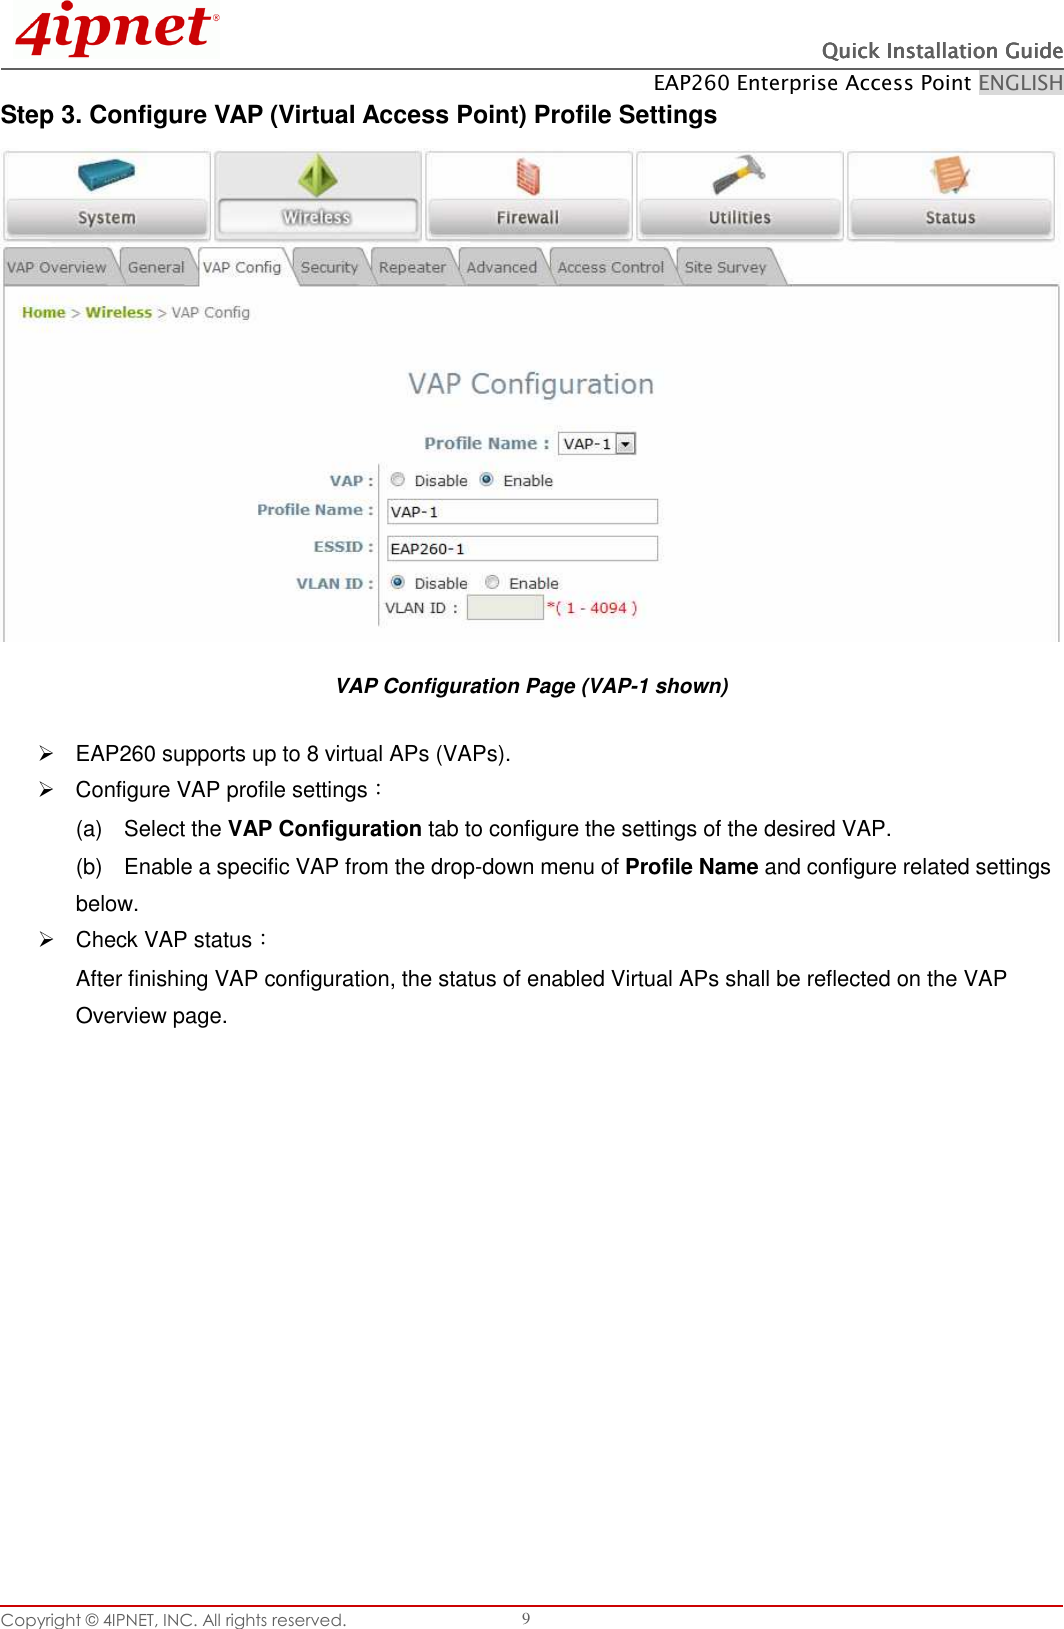   Quick Installation GuideQuick Installation GuideQuick Installation GuideQuick Installation Guide    EAP260 Enterprise Access Point ENGLISH Copyright © 4IPNET, INC. All rights reserved.    9 Step 3. Configure VAP (Virtual Access Point) Profile Settings  VAP Configuration Page (VAP-1 shown)   EAP260 supports up to 8 virtual APs (VAPs).     Configure VAP profile settings： (a)    Select the VAP Configuration tab to configure the settings of the desired VAP.   (b)    Enable a specific VAP from the drop-down menu of Profile Name and configure related settings below.   Check VAP status： After finishing VAP configuration, the status of enabled Virtual APs shall be reflected on the VAP Overview page.   